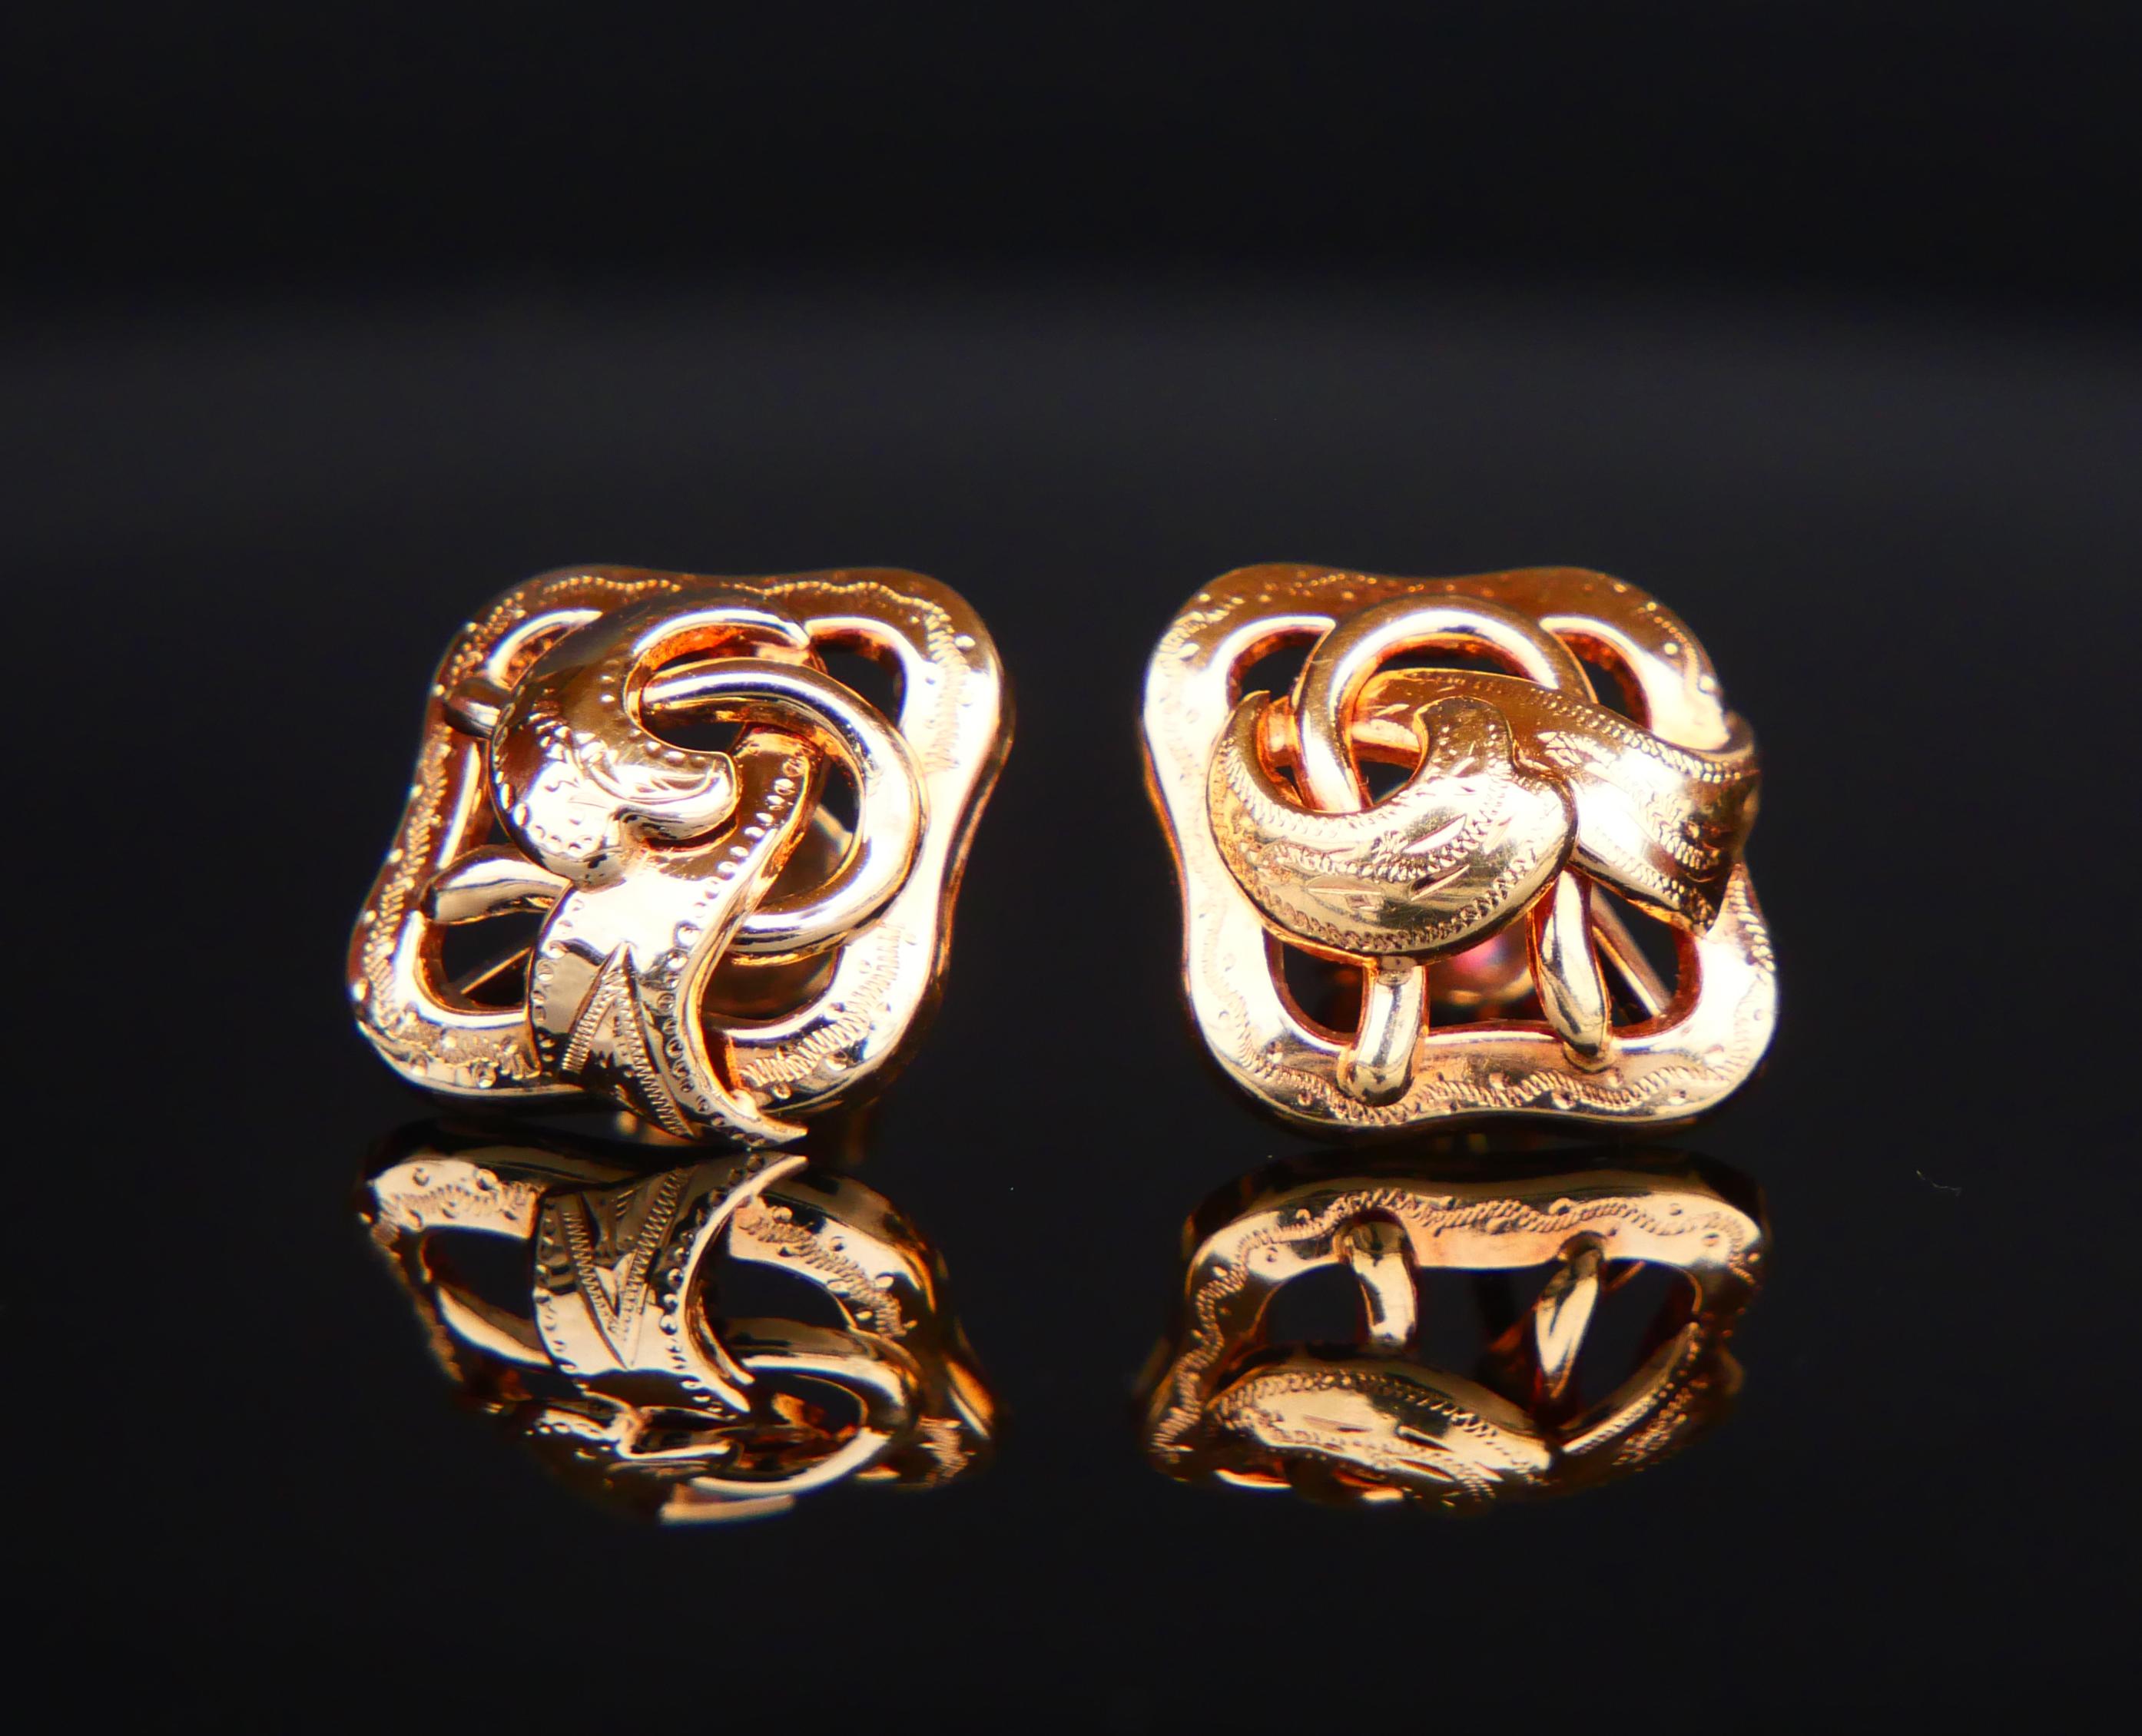 A pair of vintage openwork studs in 18K Orange Gold accented with hand-engraved ornaments. In used fine condition.

Swedish hallmarks on both earrings and stoppers, 18K, date combination H9 / made in 1958.

Each earring is 17 mm x 17 mm x 6 mm deep